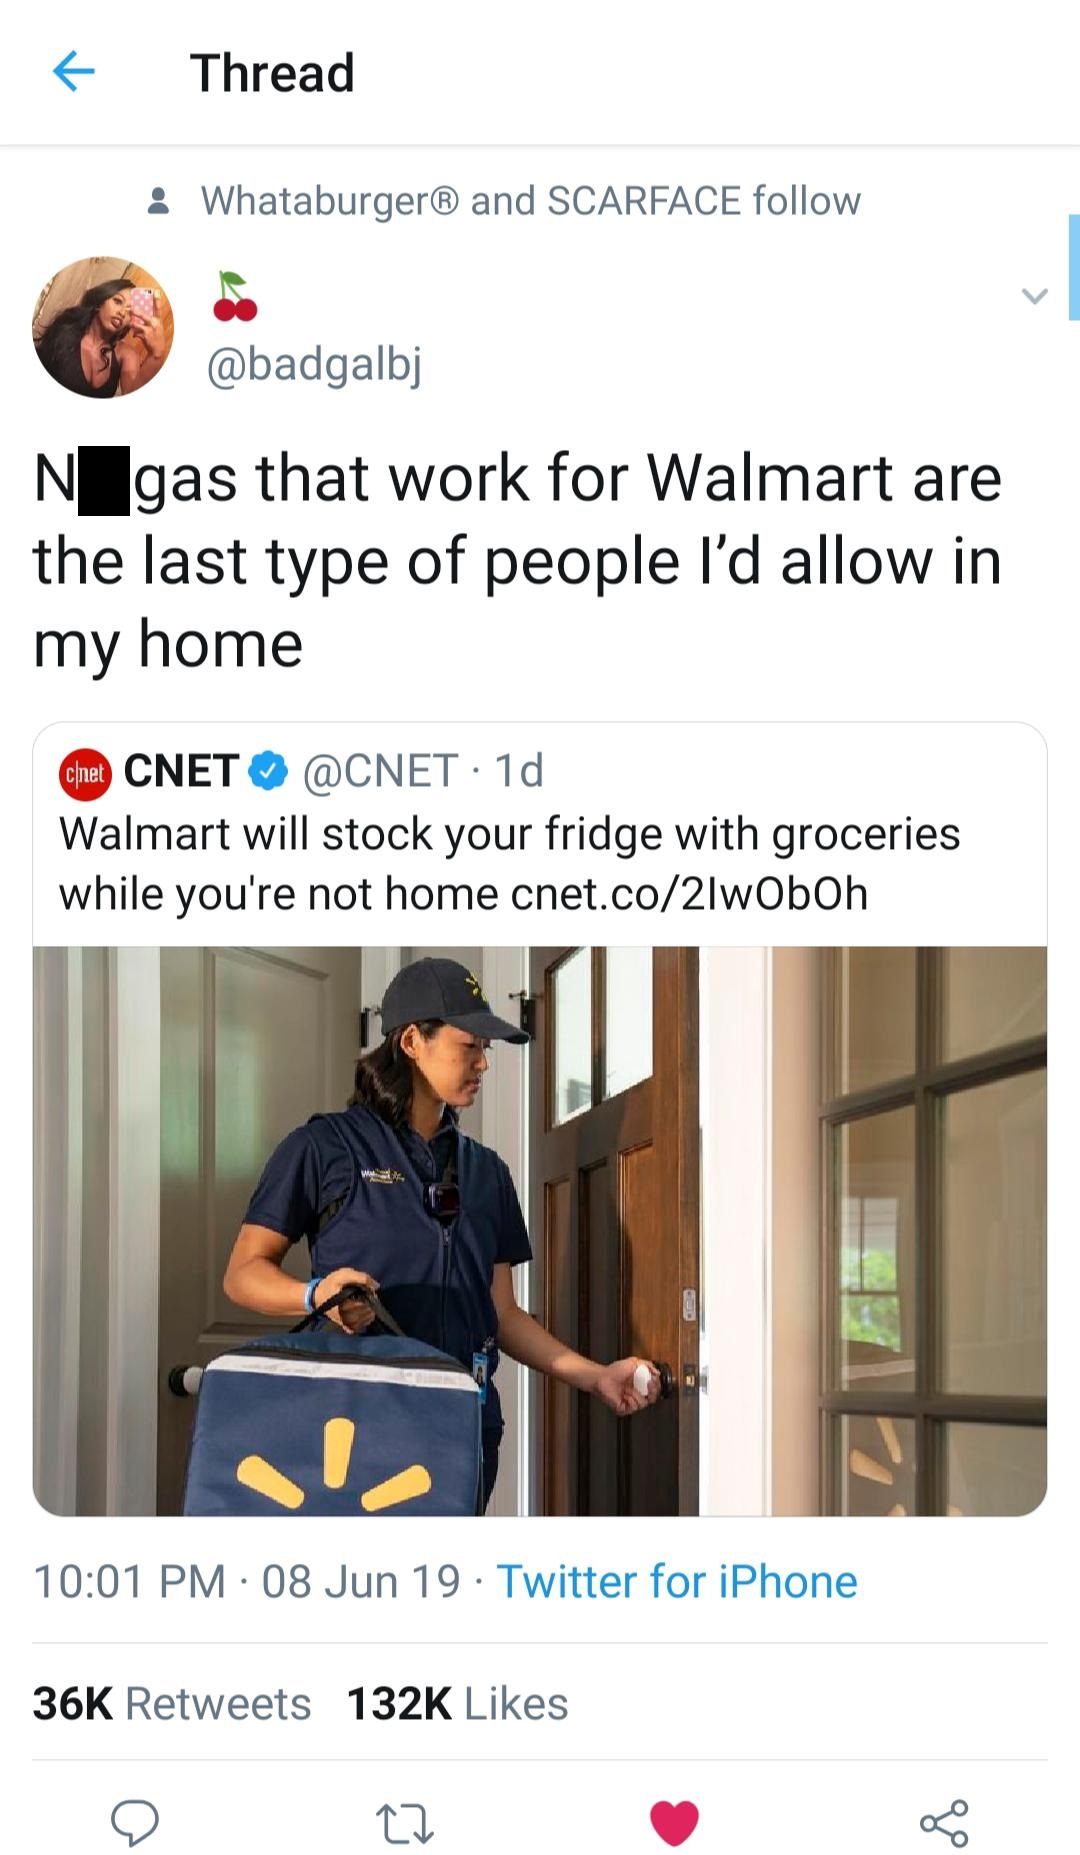 communication - Thread Whataburger and Scarface Ngas that work for Walmart are the last type of people I'd allow in my home chel Cnet 1d Walmart will stock your fridge with groceries while you're not home cnet.co2lwOboh 08 Jun 19 Twitter for iPhone 36K 22